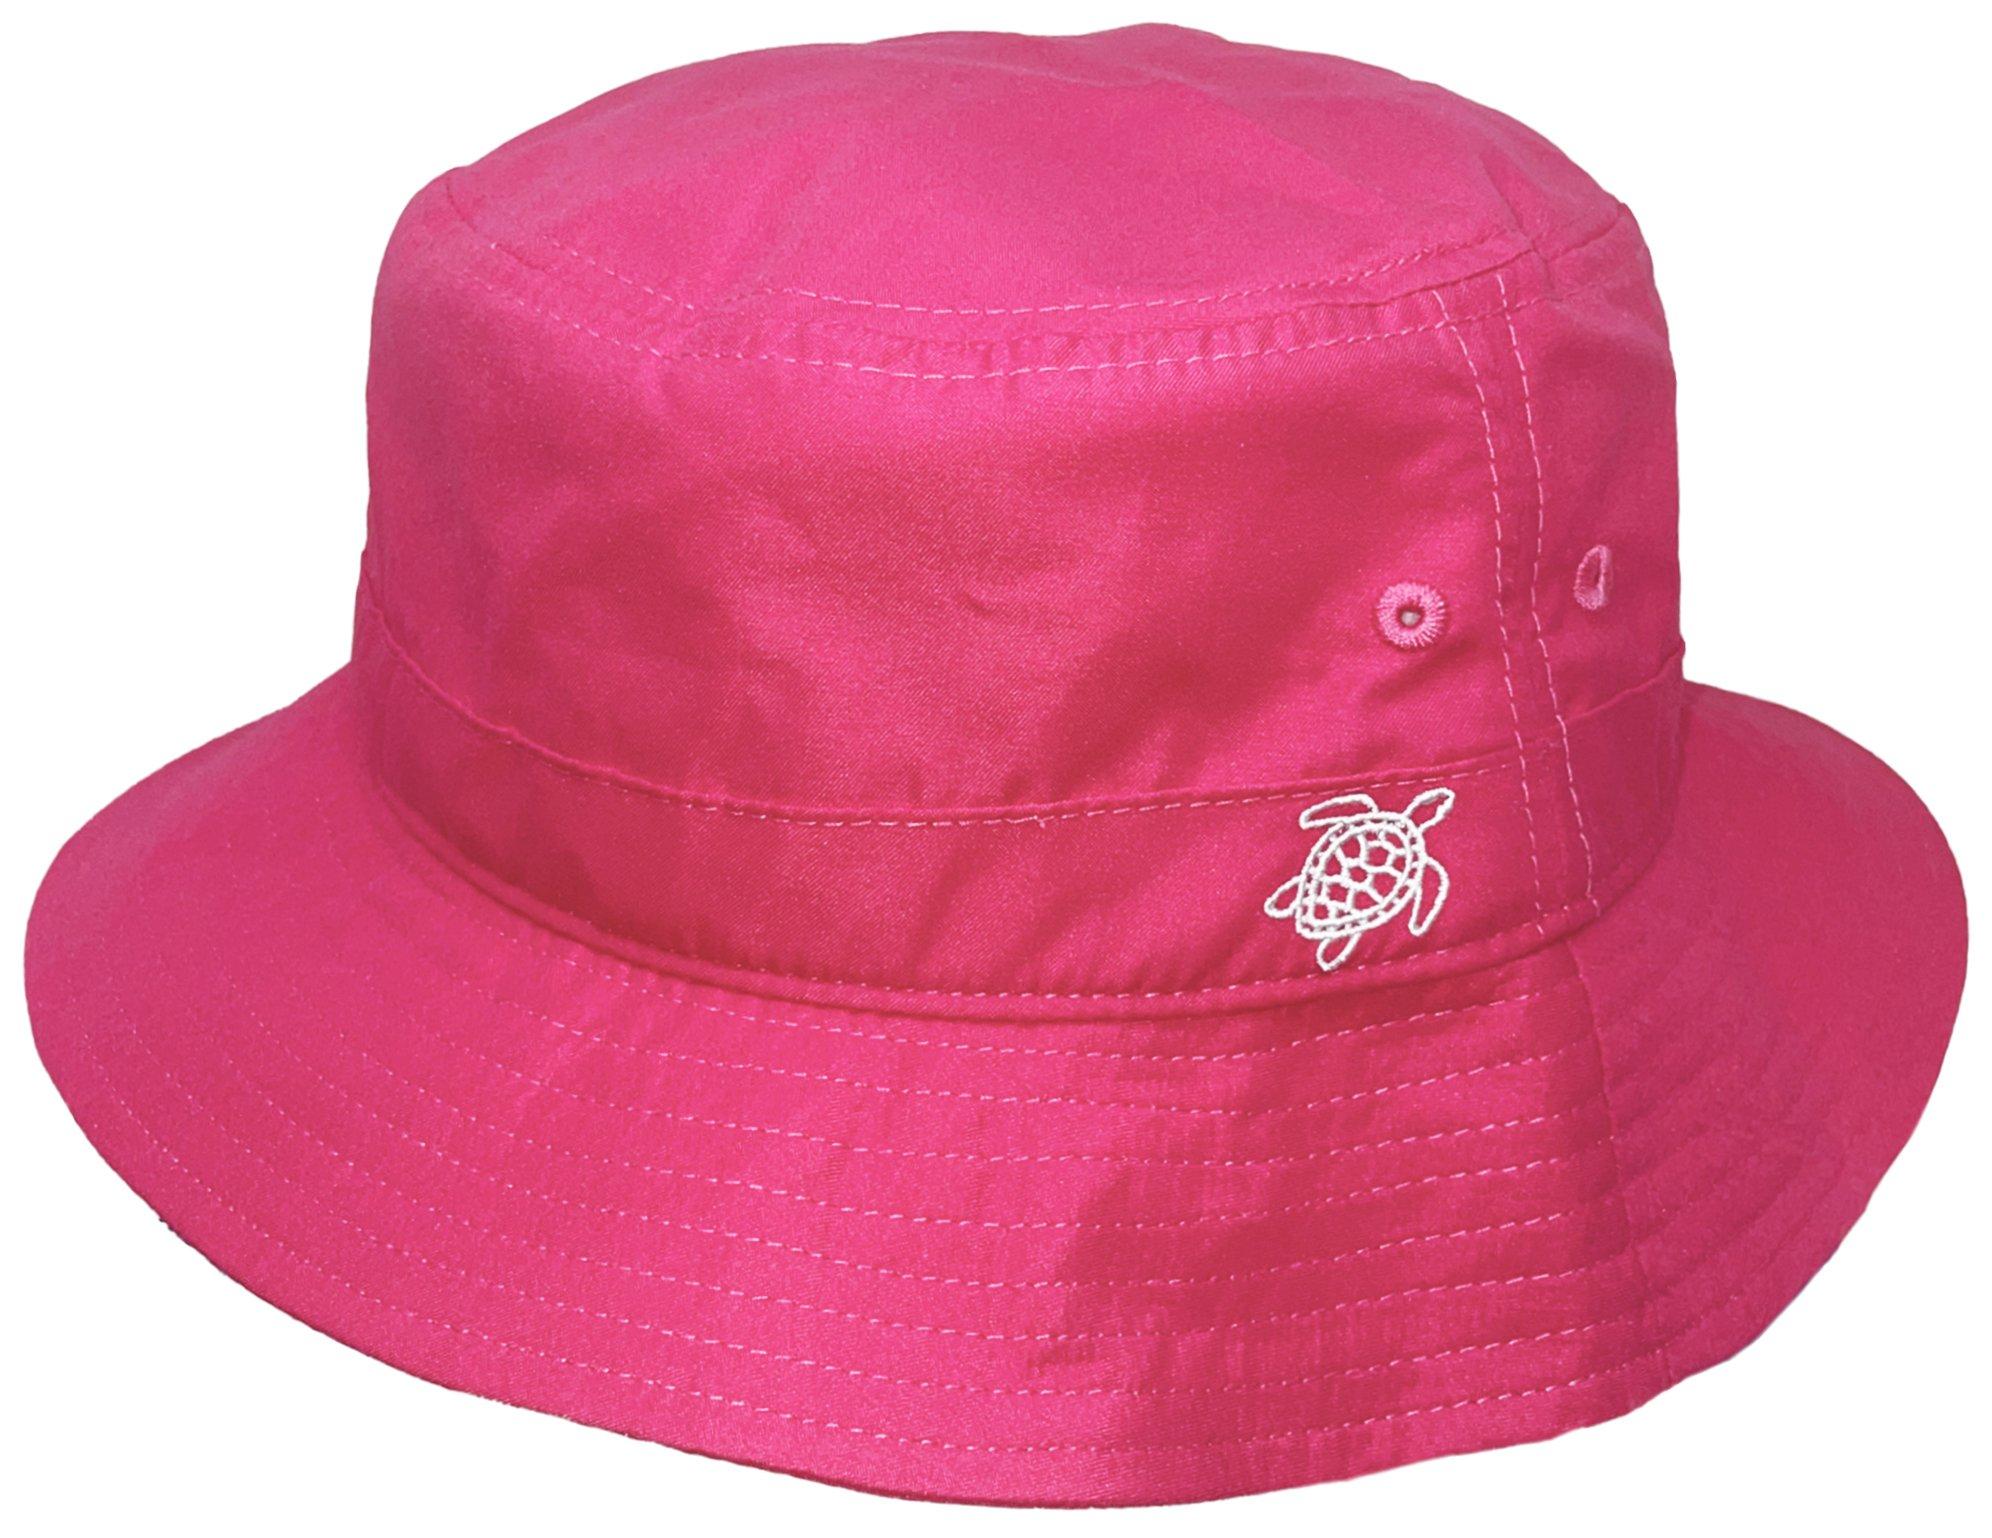 Womens Solid Color Bucket Hat